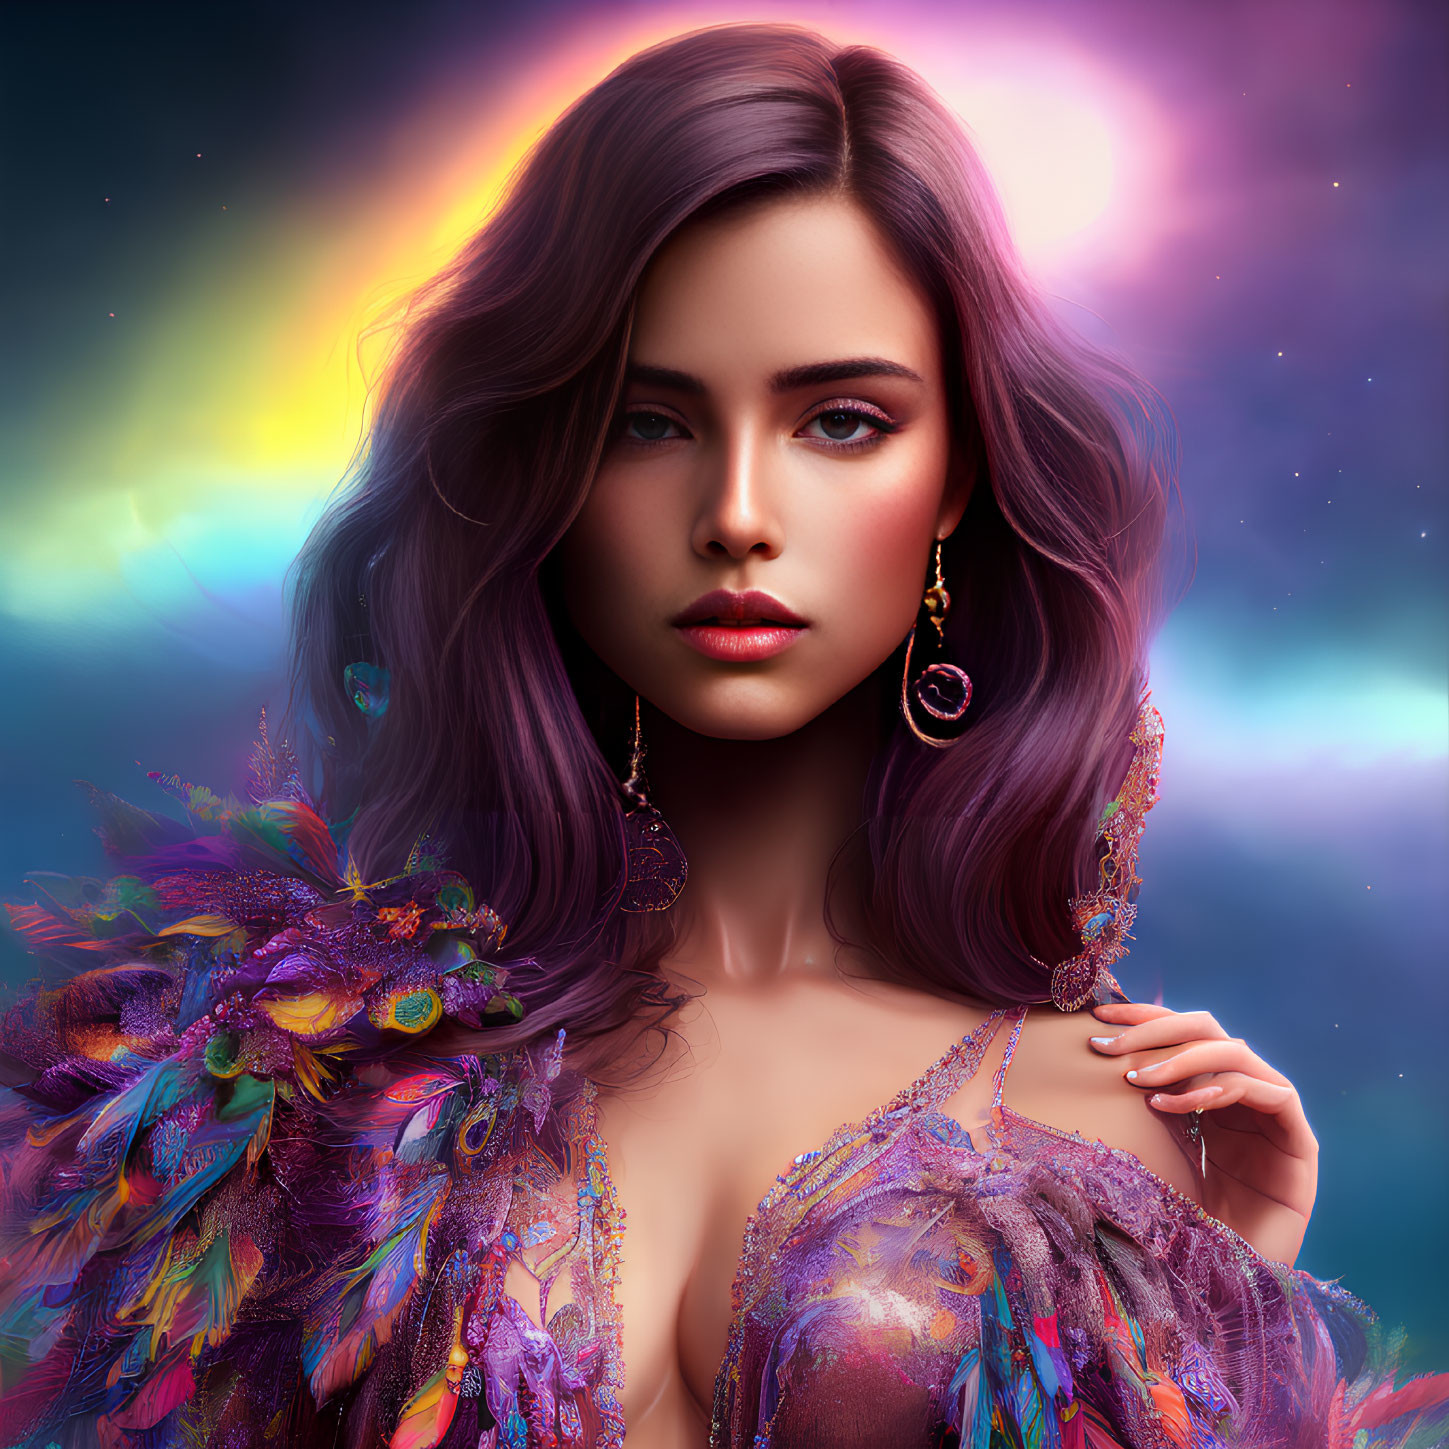 Violet-haired woman in sparkling, feather attire on cosmic backdrop